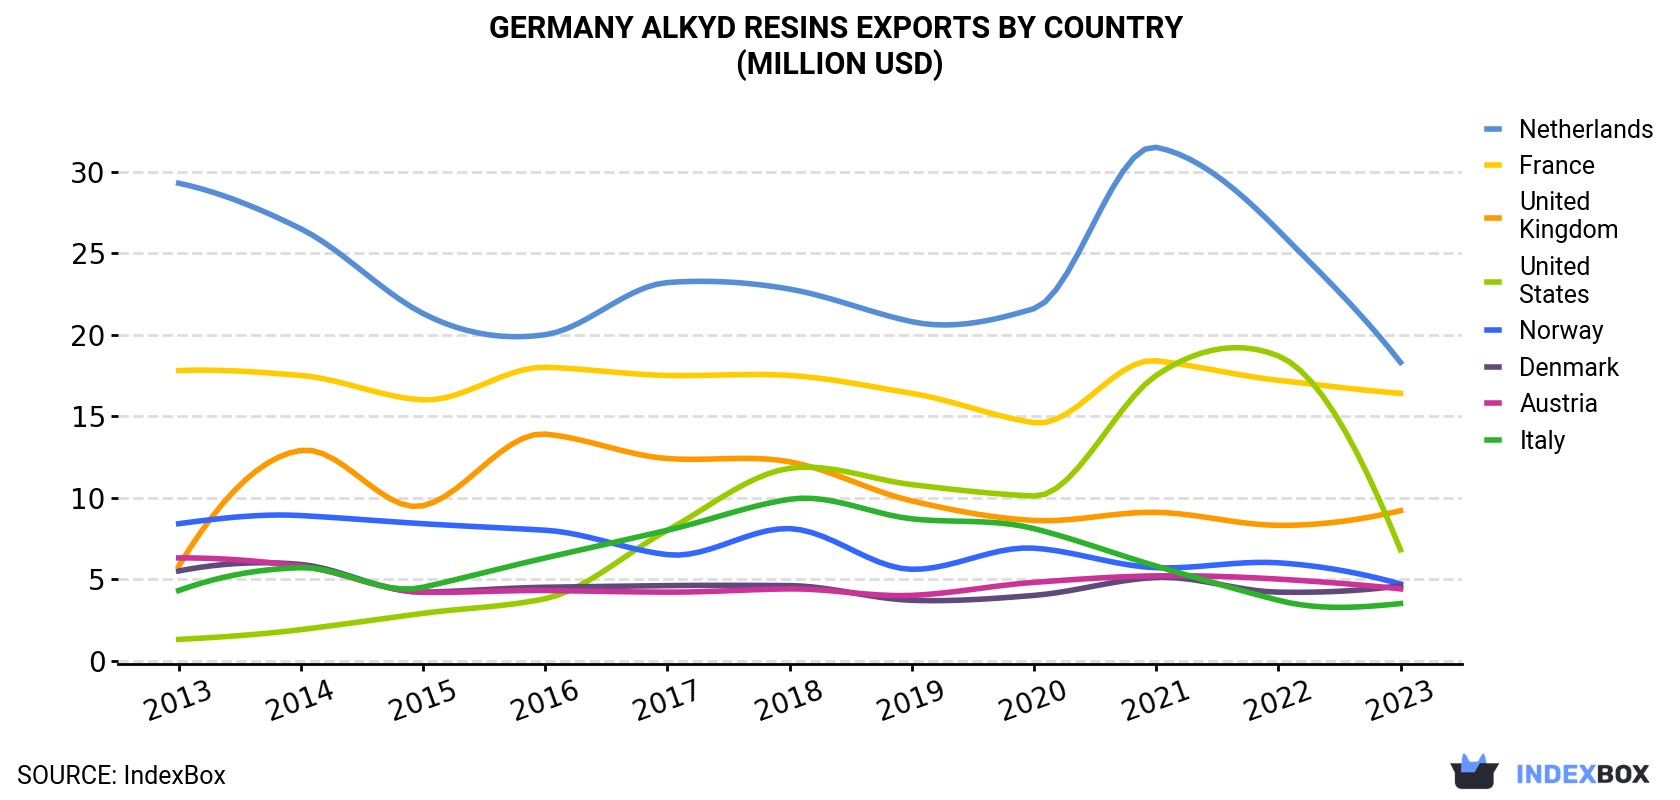 Germany Alkyd Resins Exports By Country (Million USD)